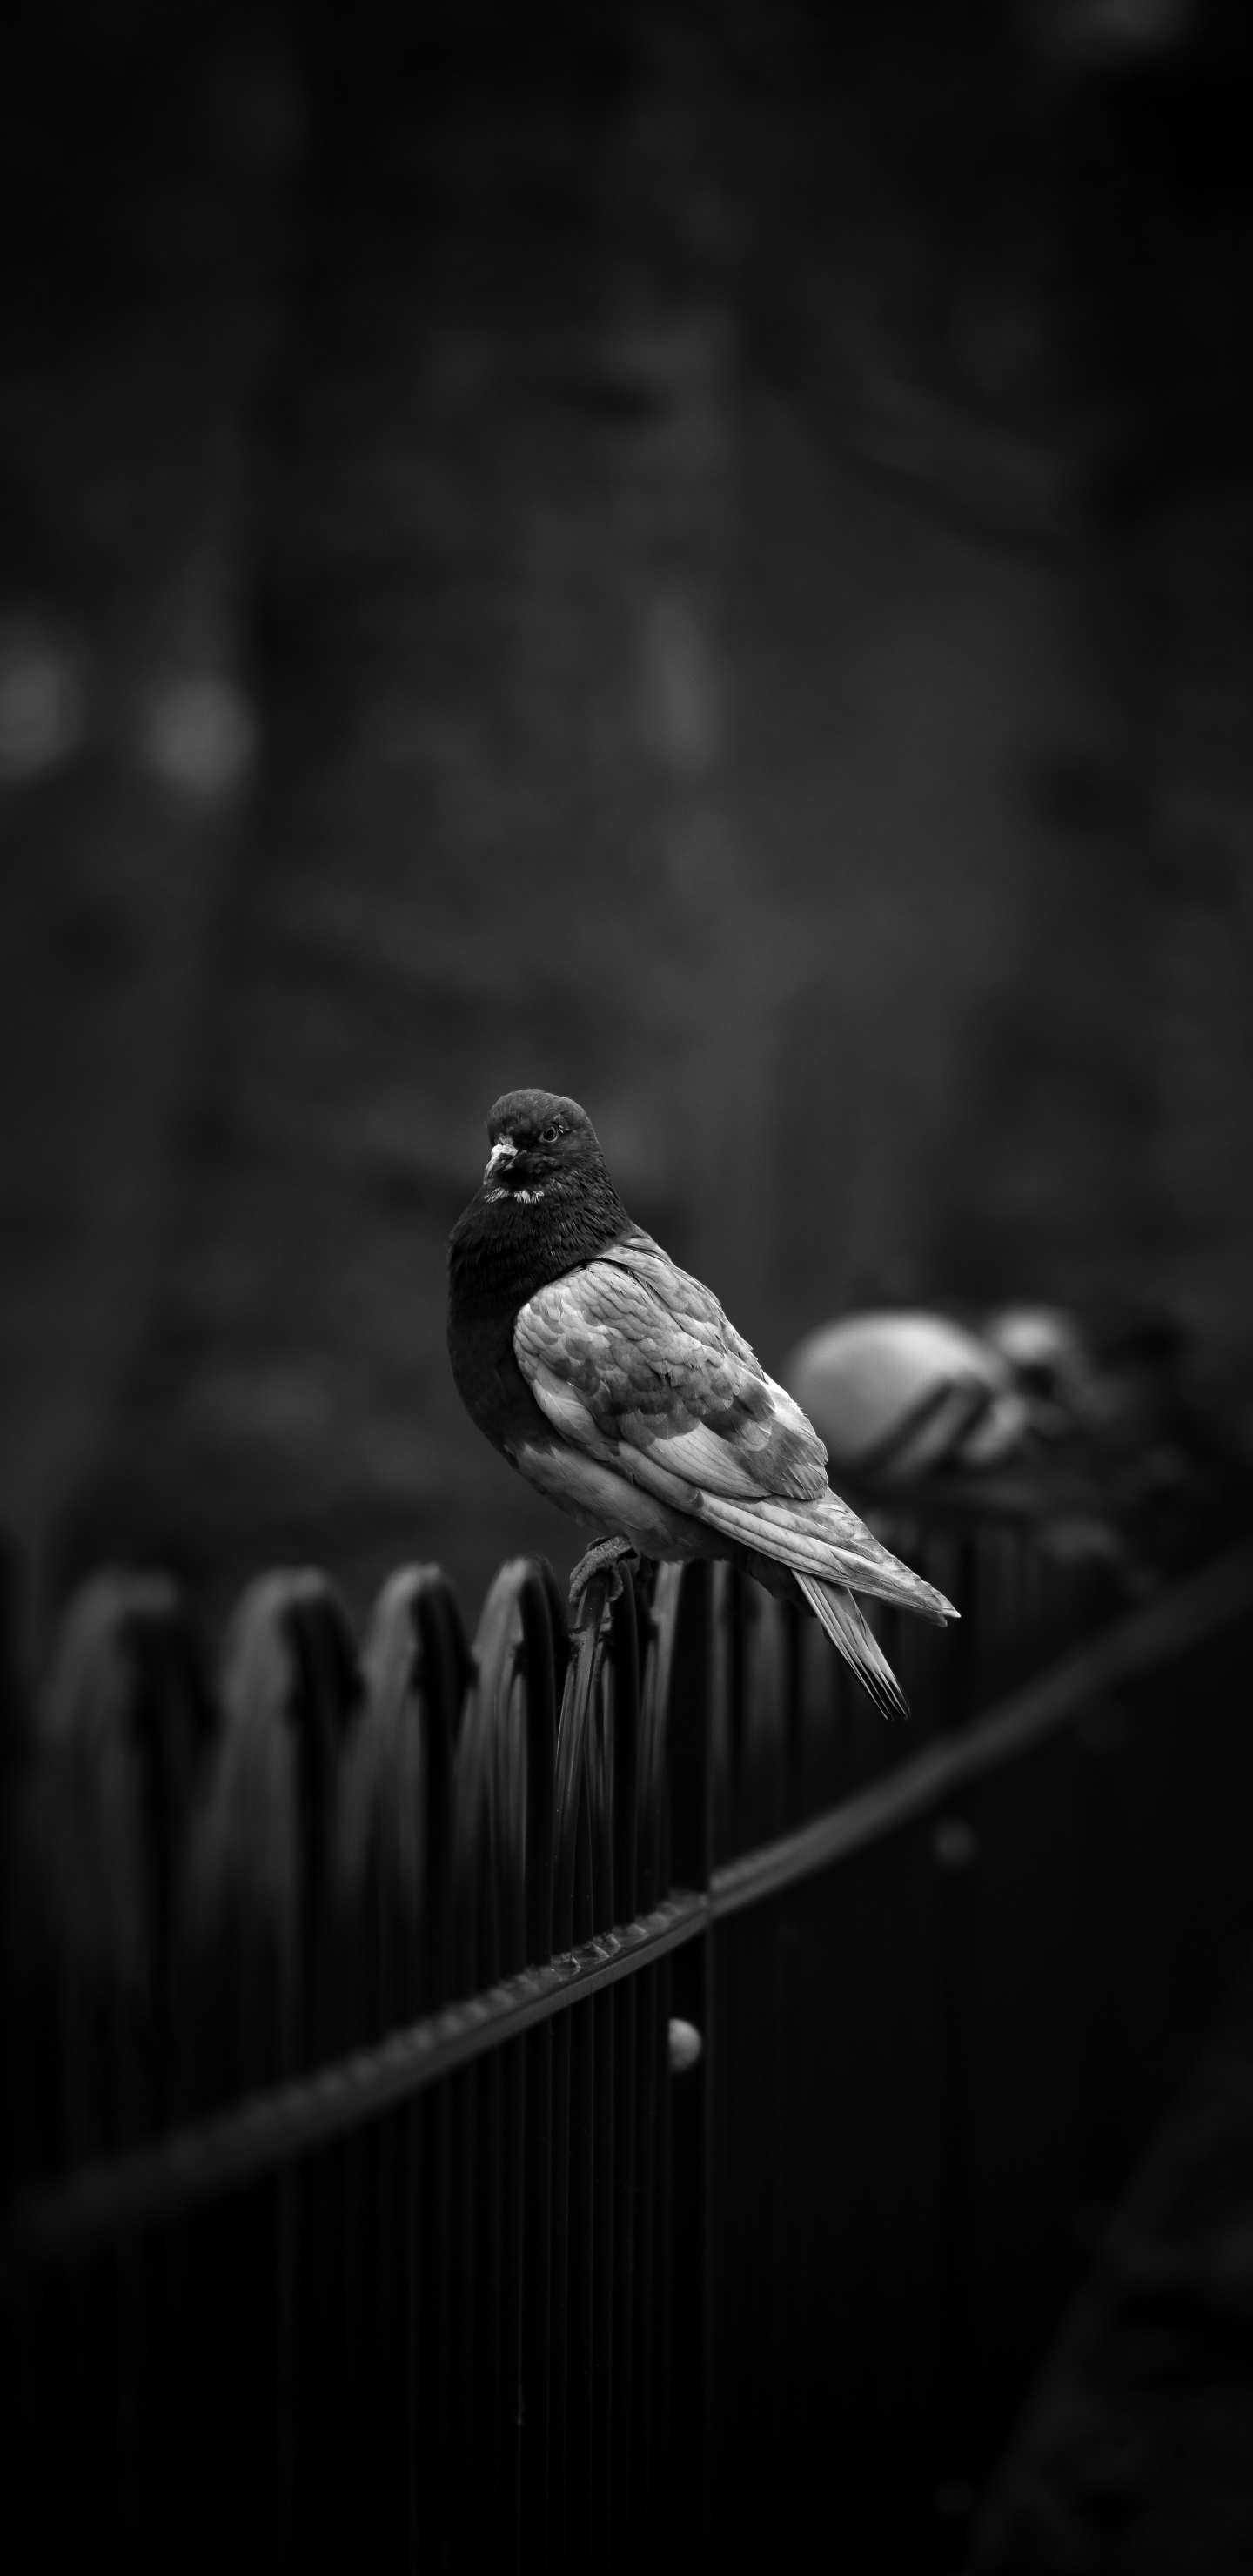 Grayscale Photo of a Bird on a Wooden Fence. Wallpaper in 1440x2960 Resolution